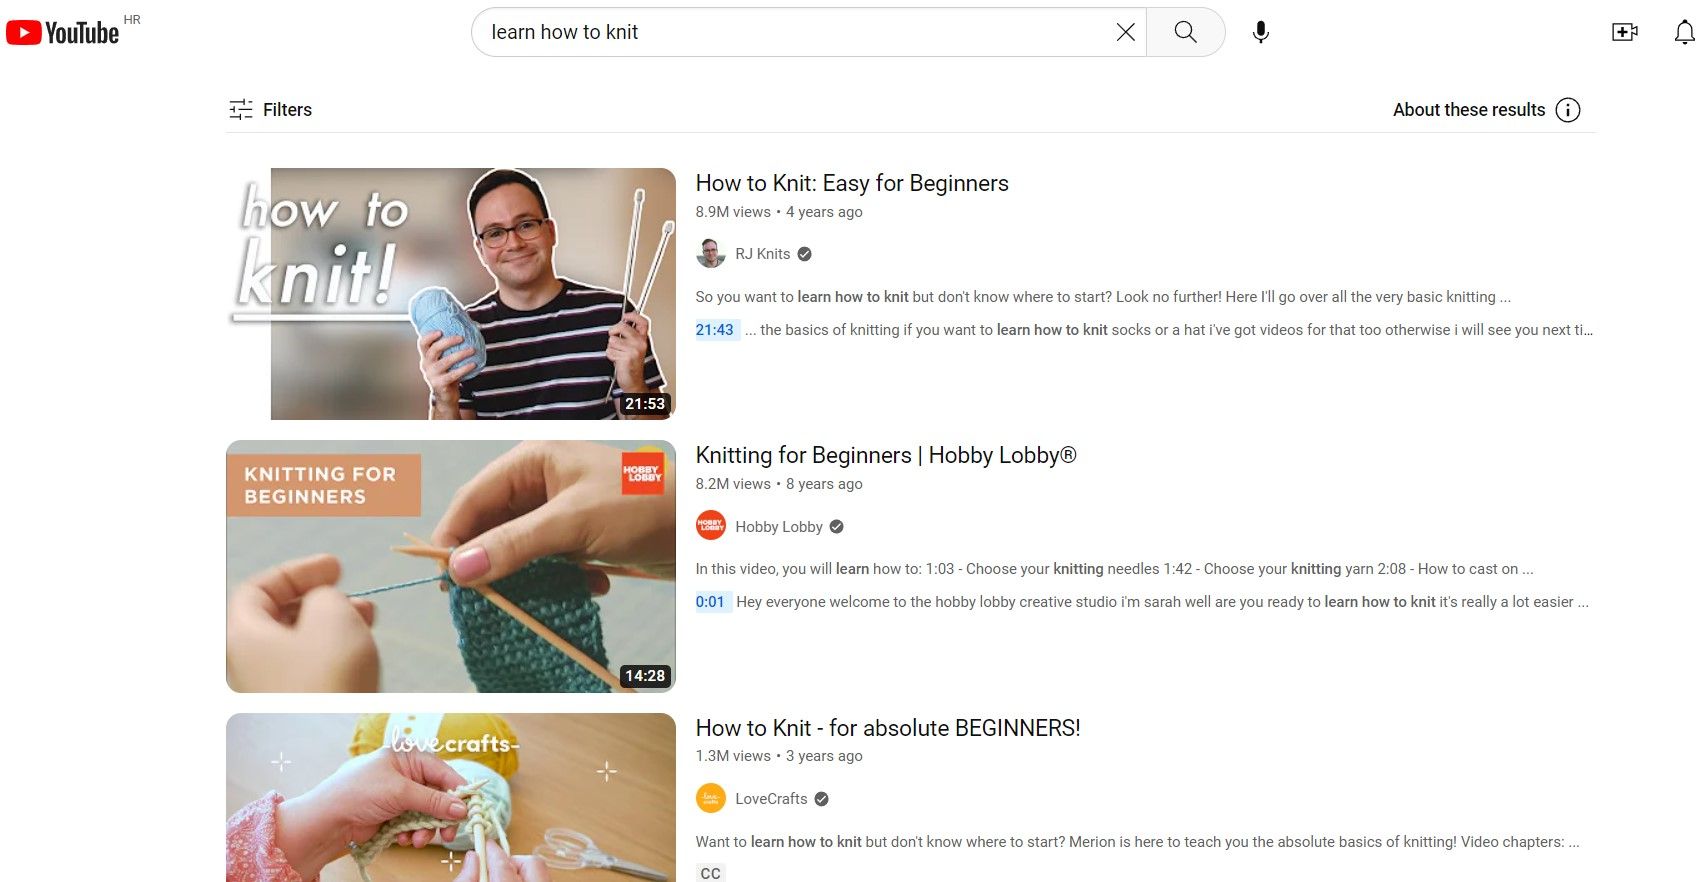 Screenshot of YouTube learn how to knit